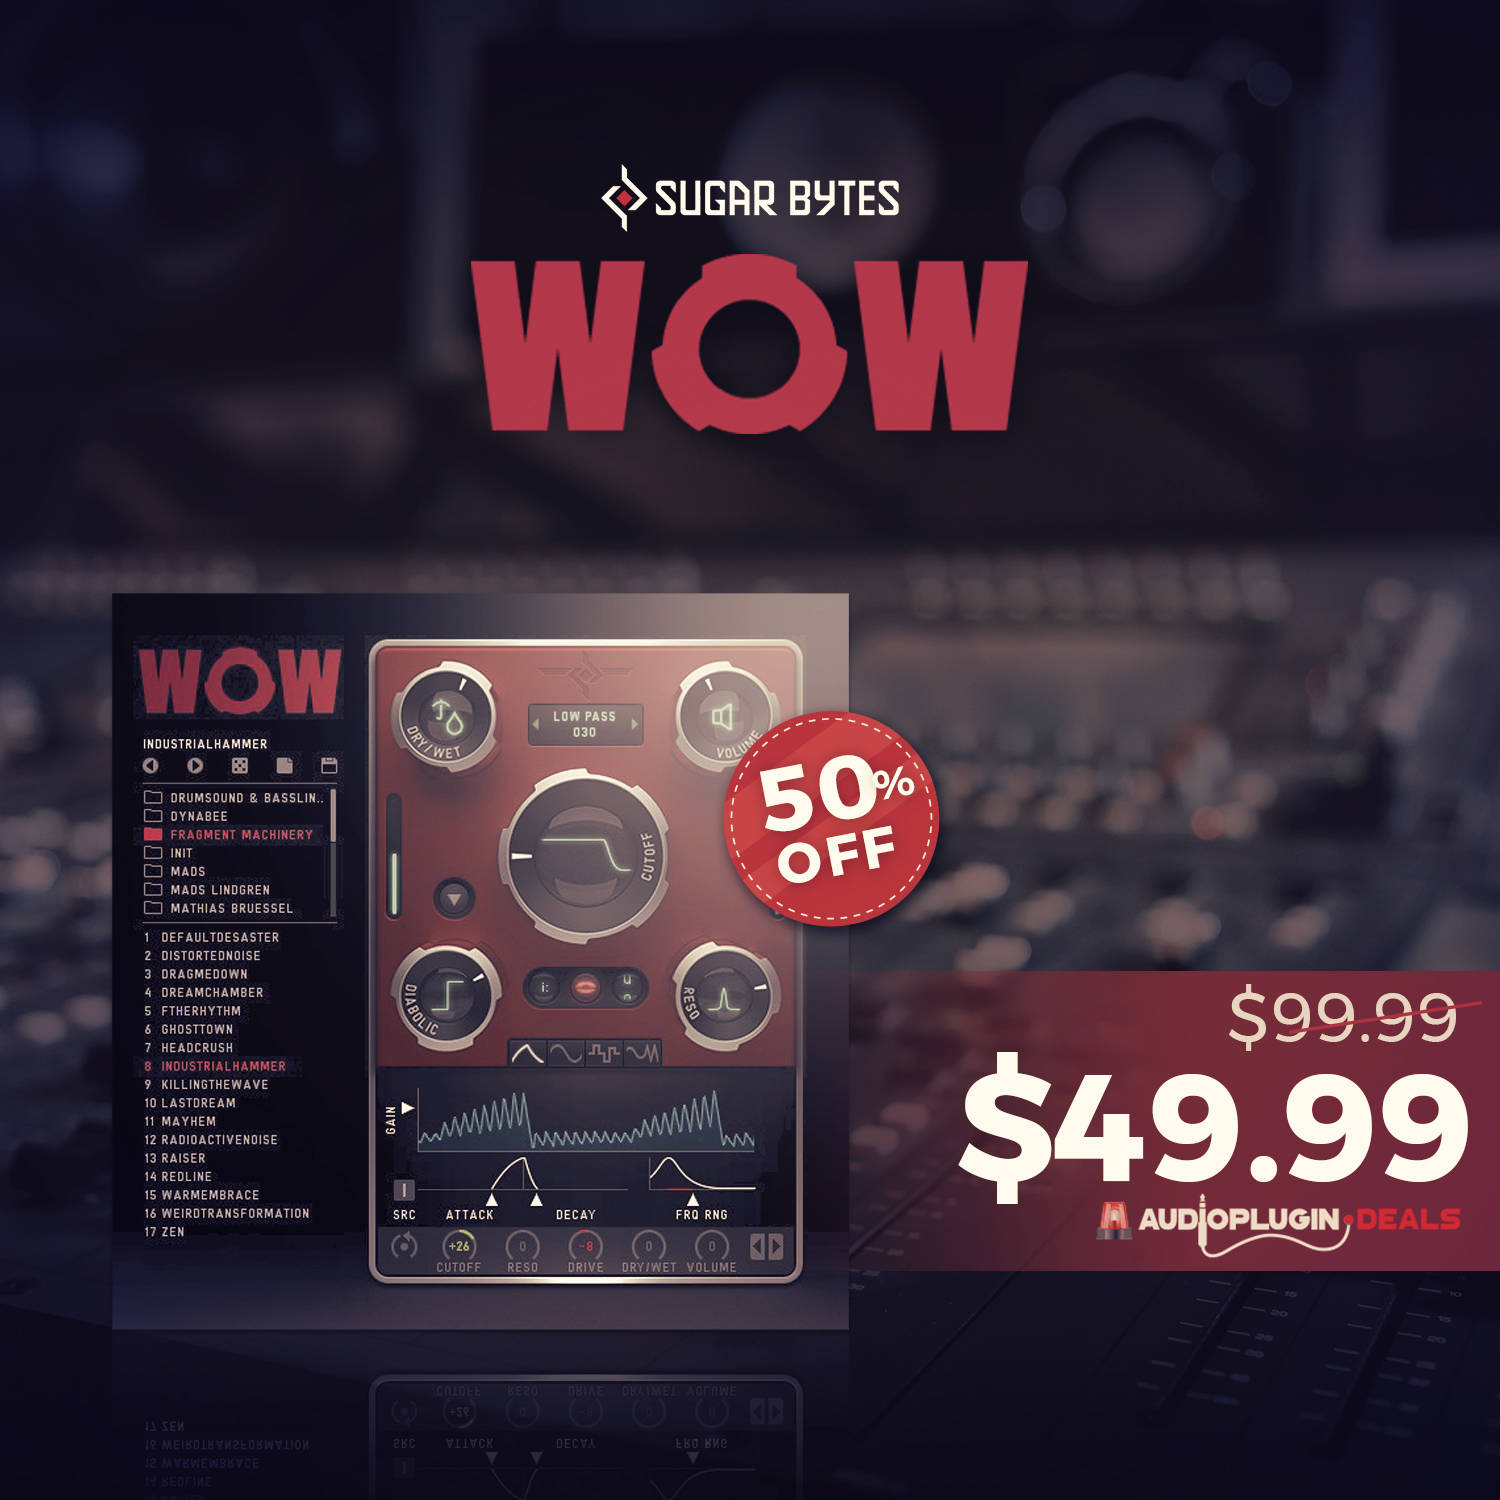 Get [50% OFF] WOW 2 (Filter) by Sugar Bytes